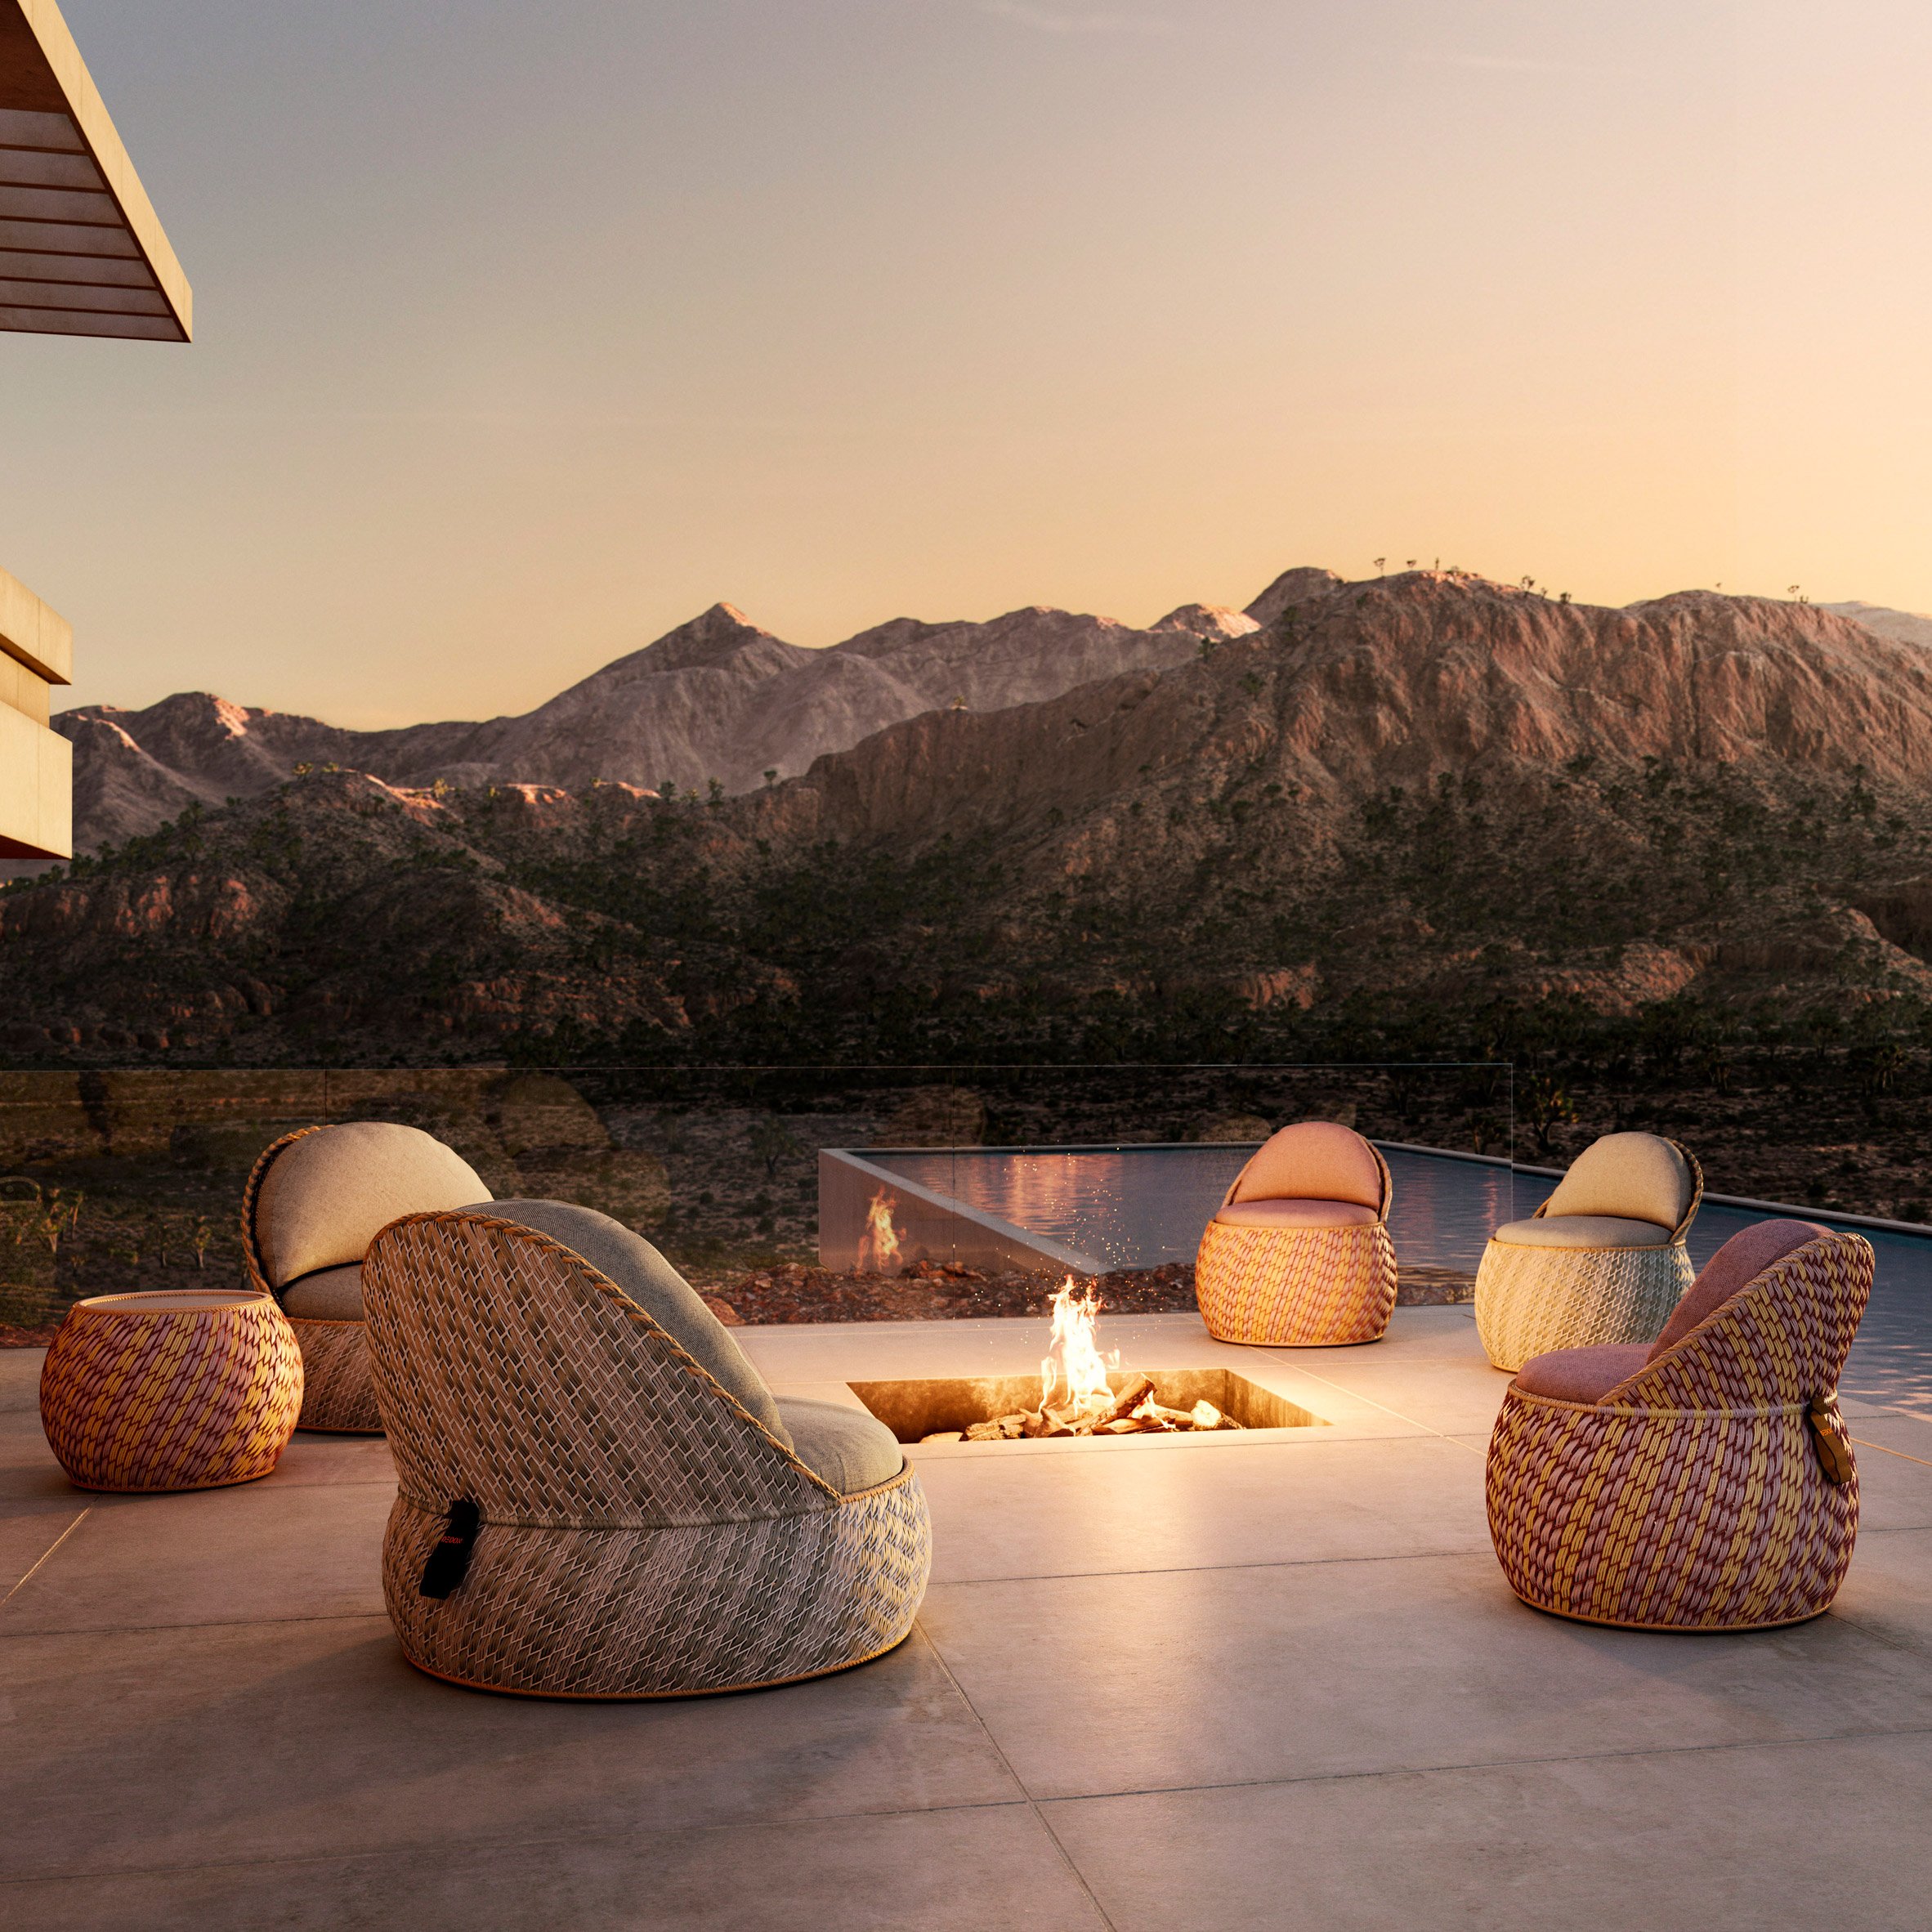 Dala outdoor seating by Stephen Burks for Dedon